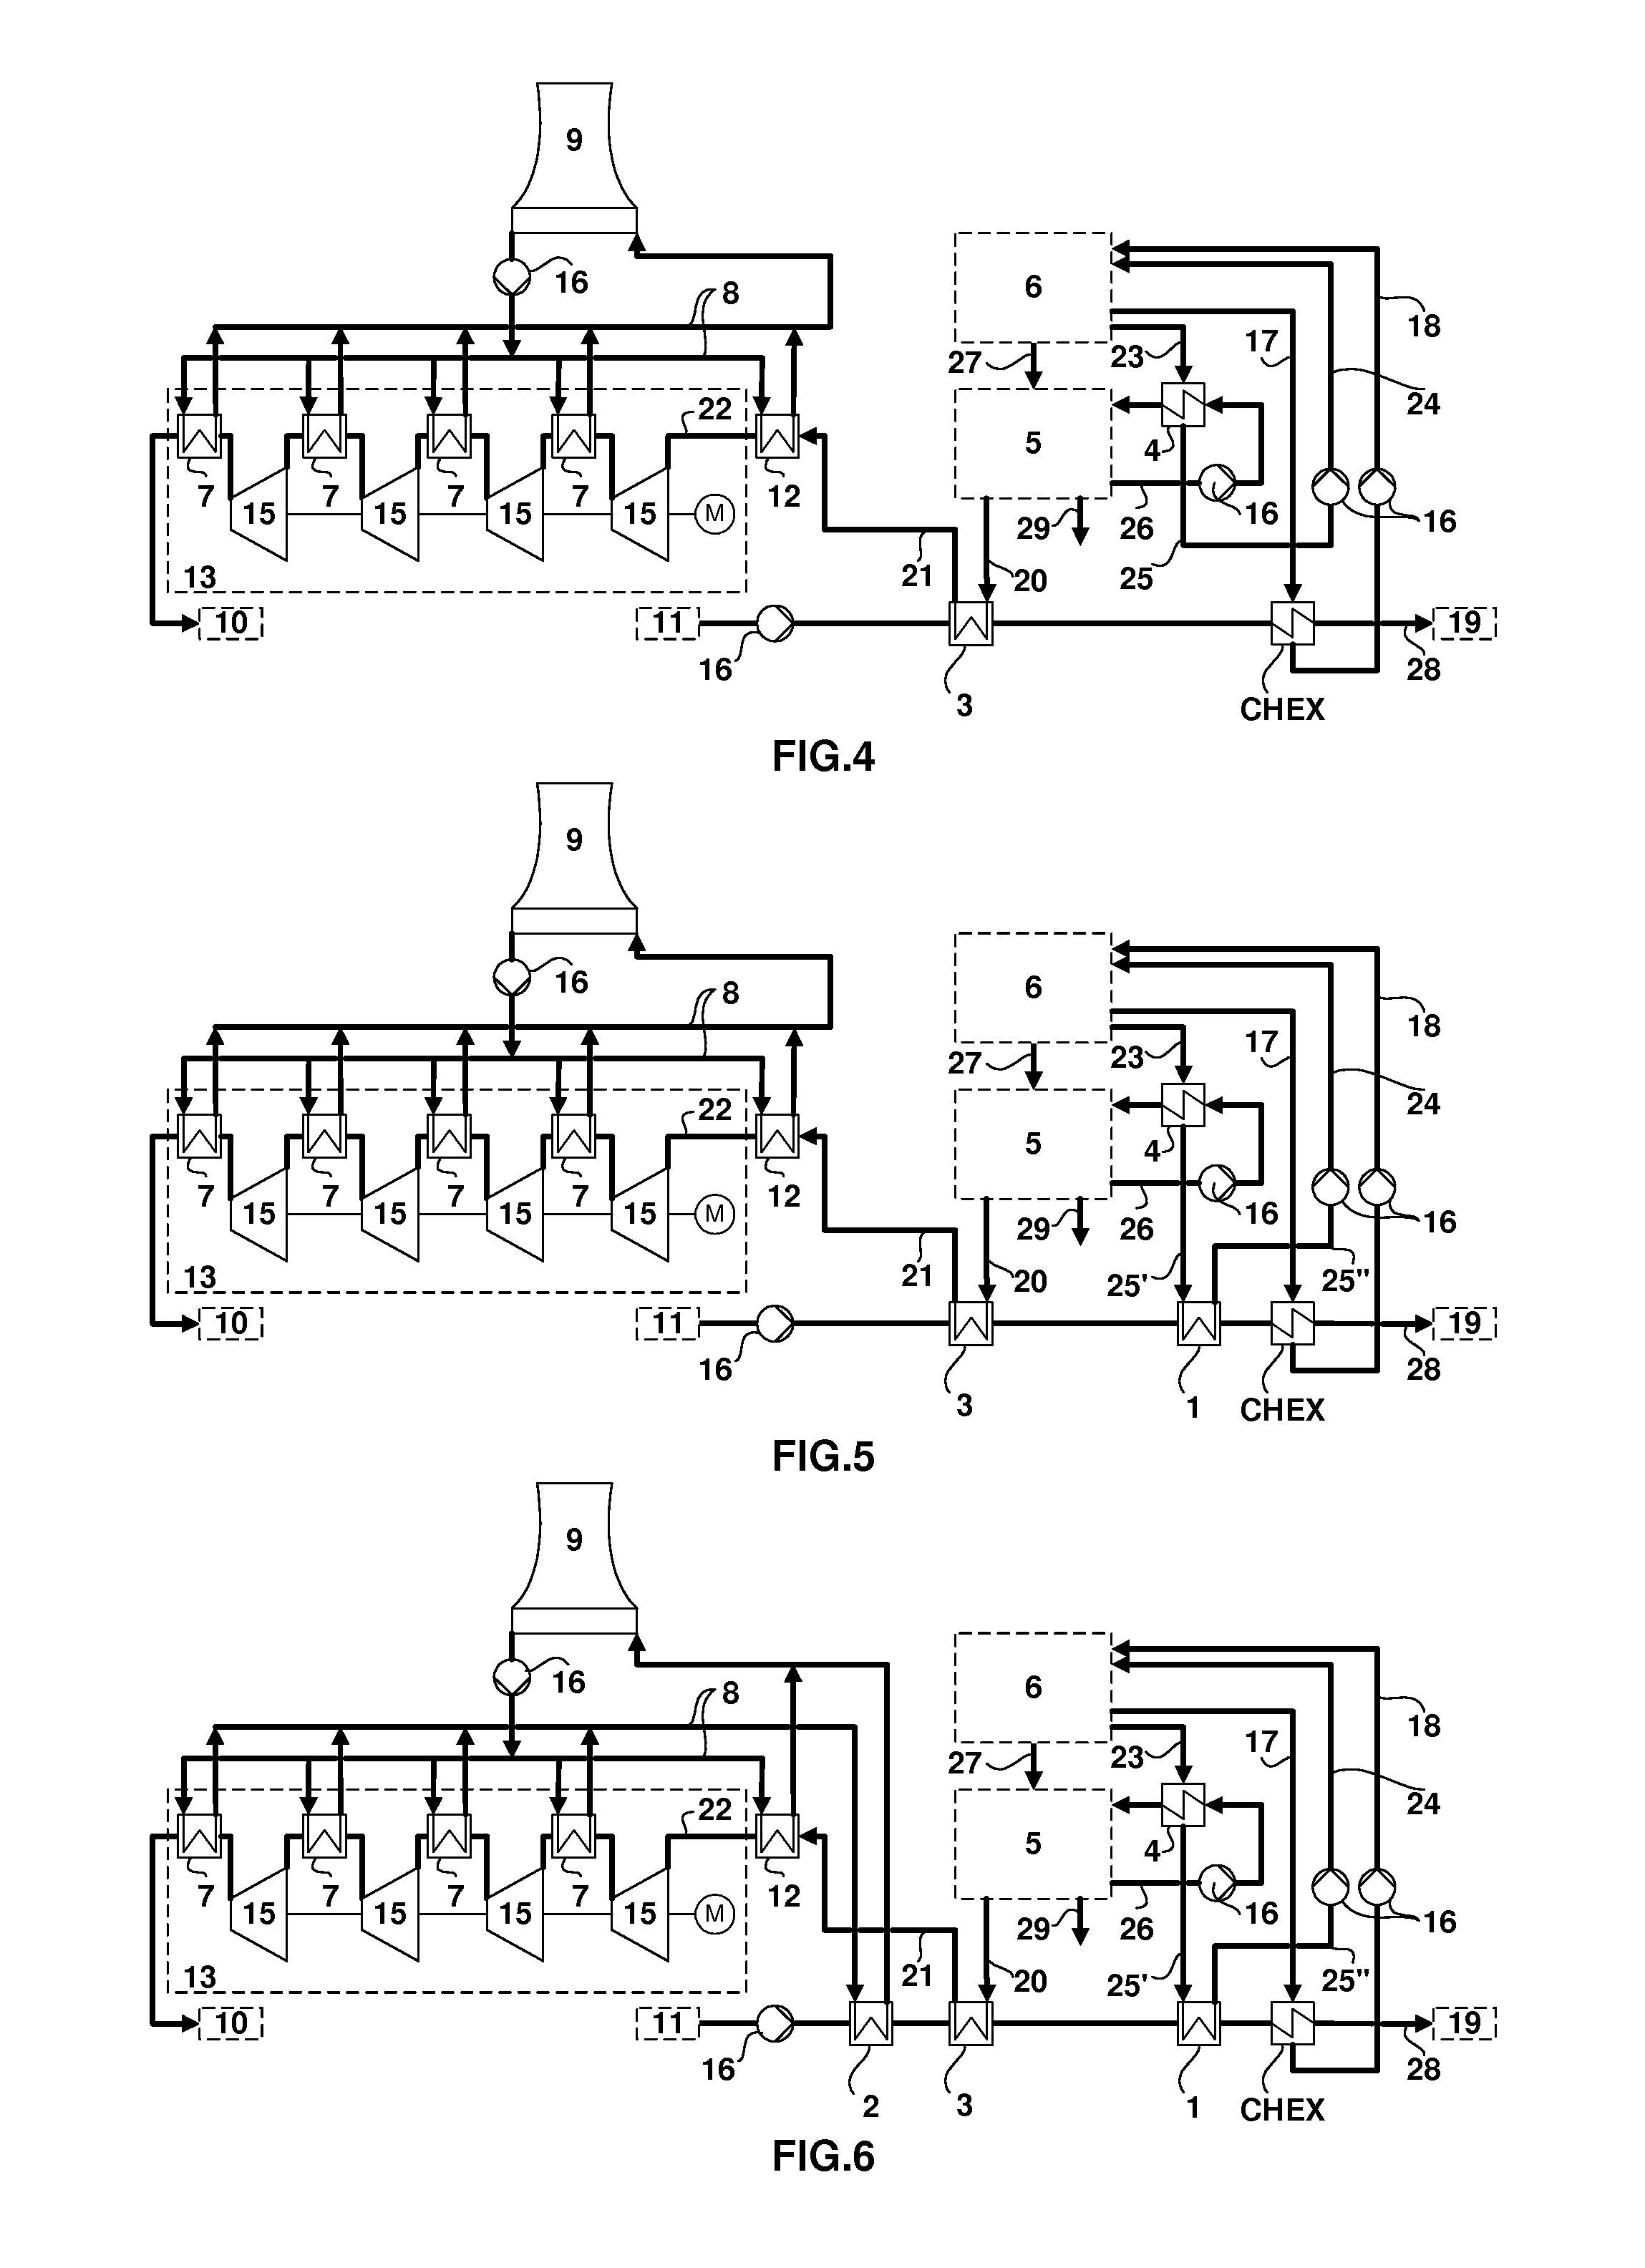 Thermal integration of a carbon dioxide capture and compression unit with a steam or combined cycle plant